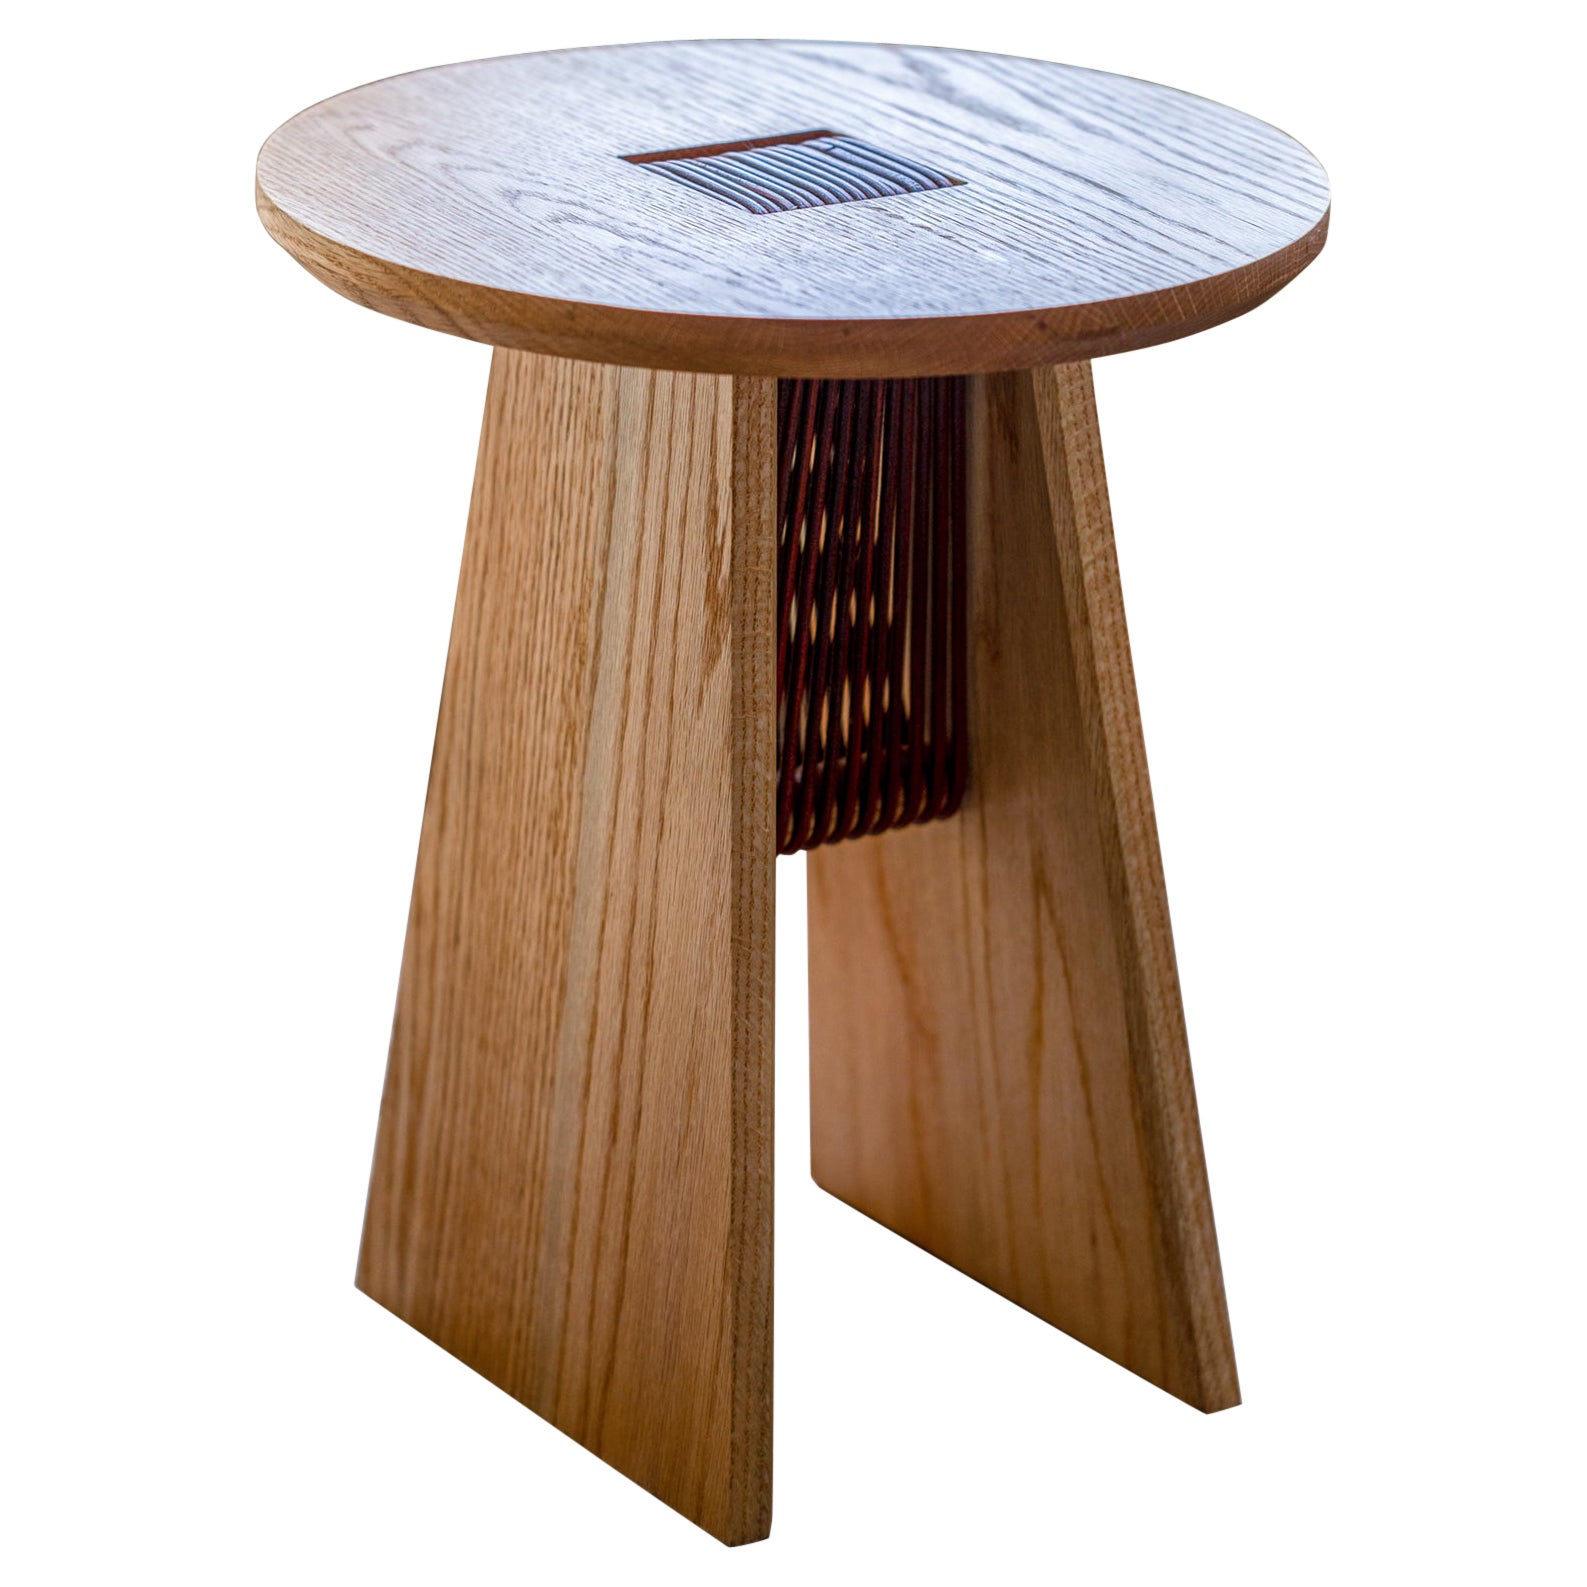 Basurto 02 Contemporary Wooden Stool with Leather Details